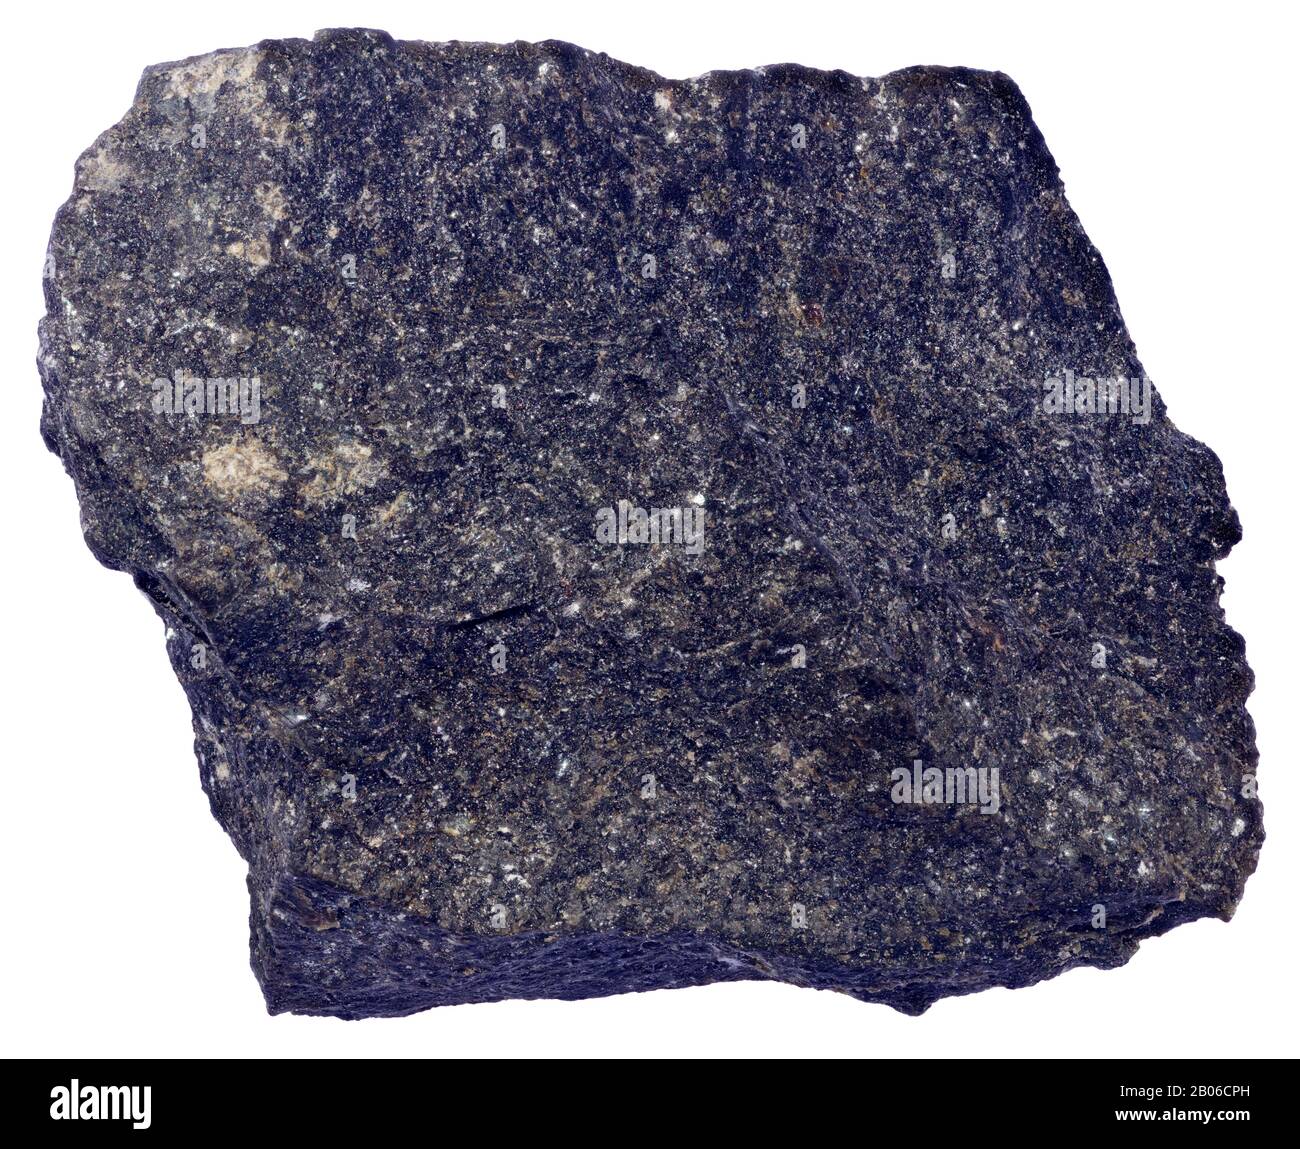 Hornfels, Contact Metamophism, Grenville, Quebec Hornfels is the group name for a set of contact metamorphic rocks that have been baked and hardened b Stock Photo